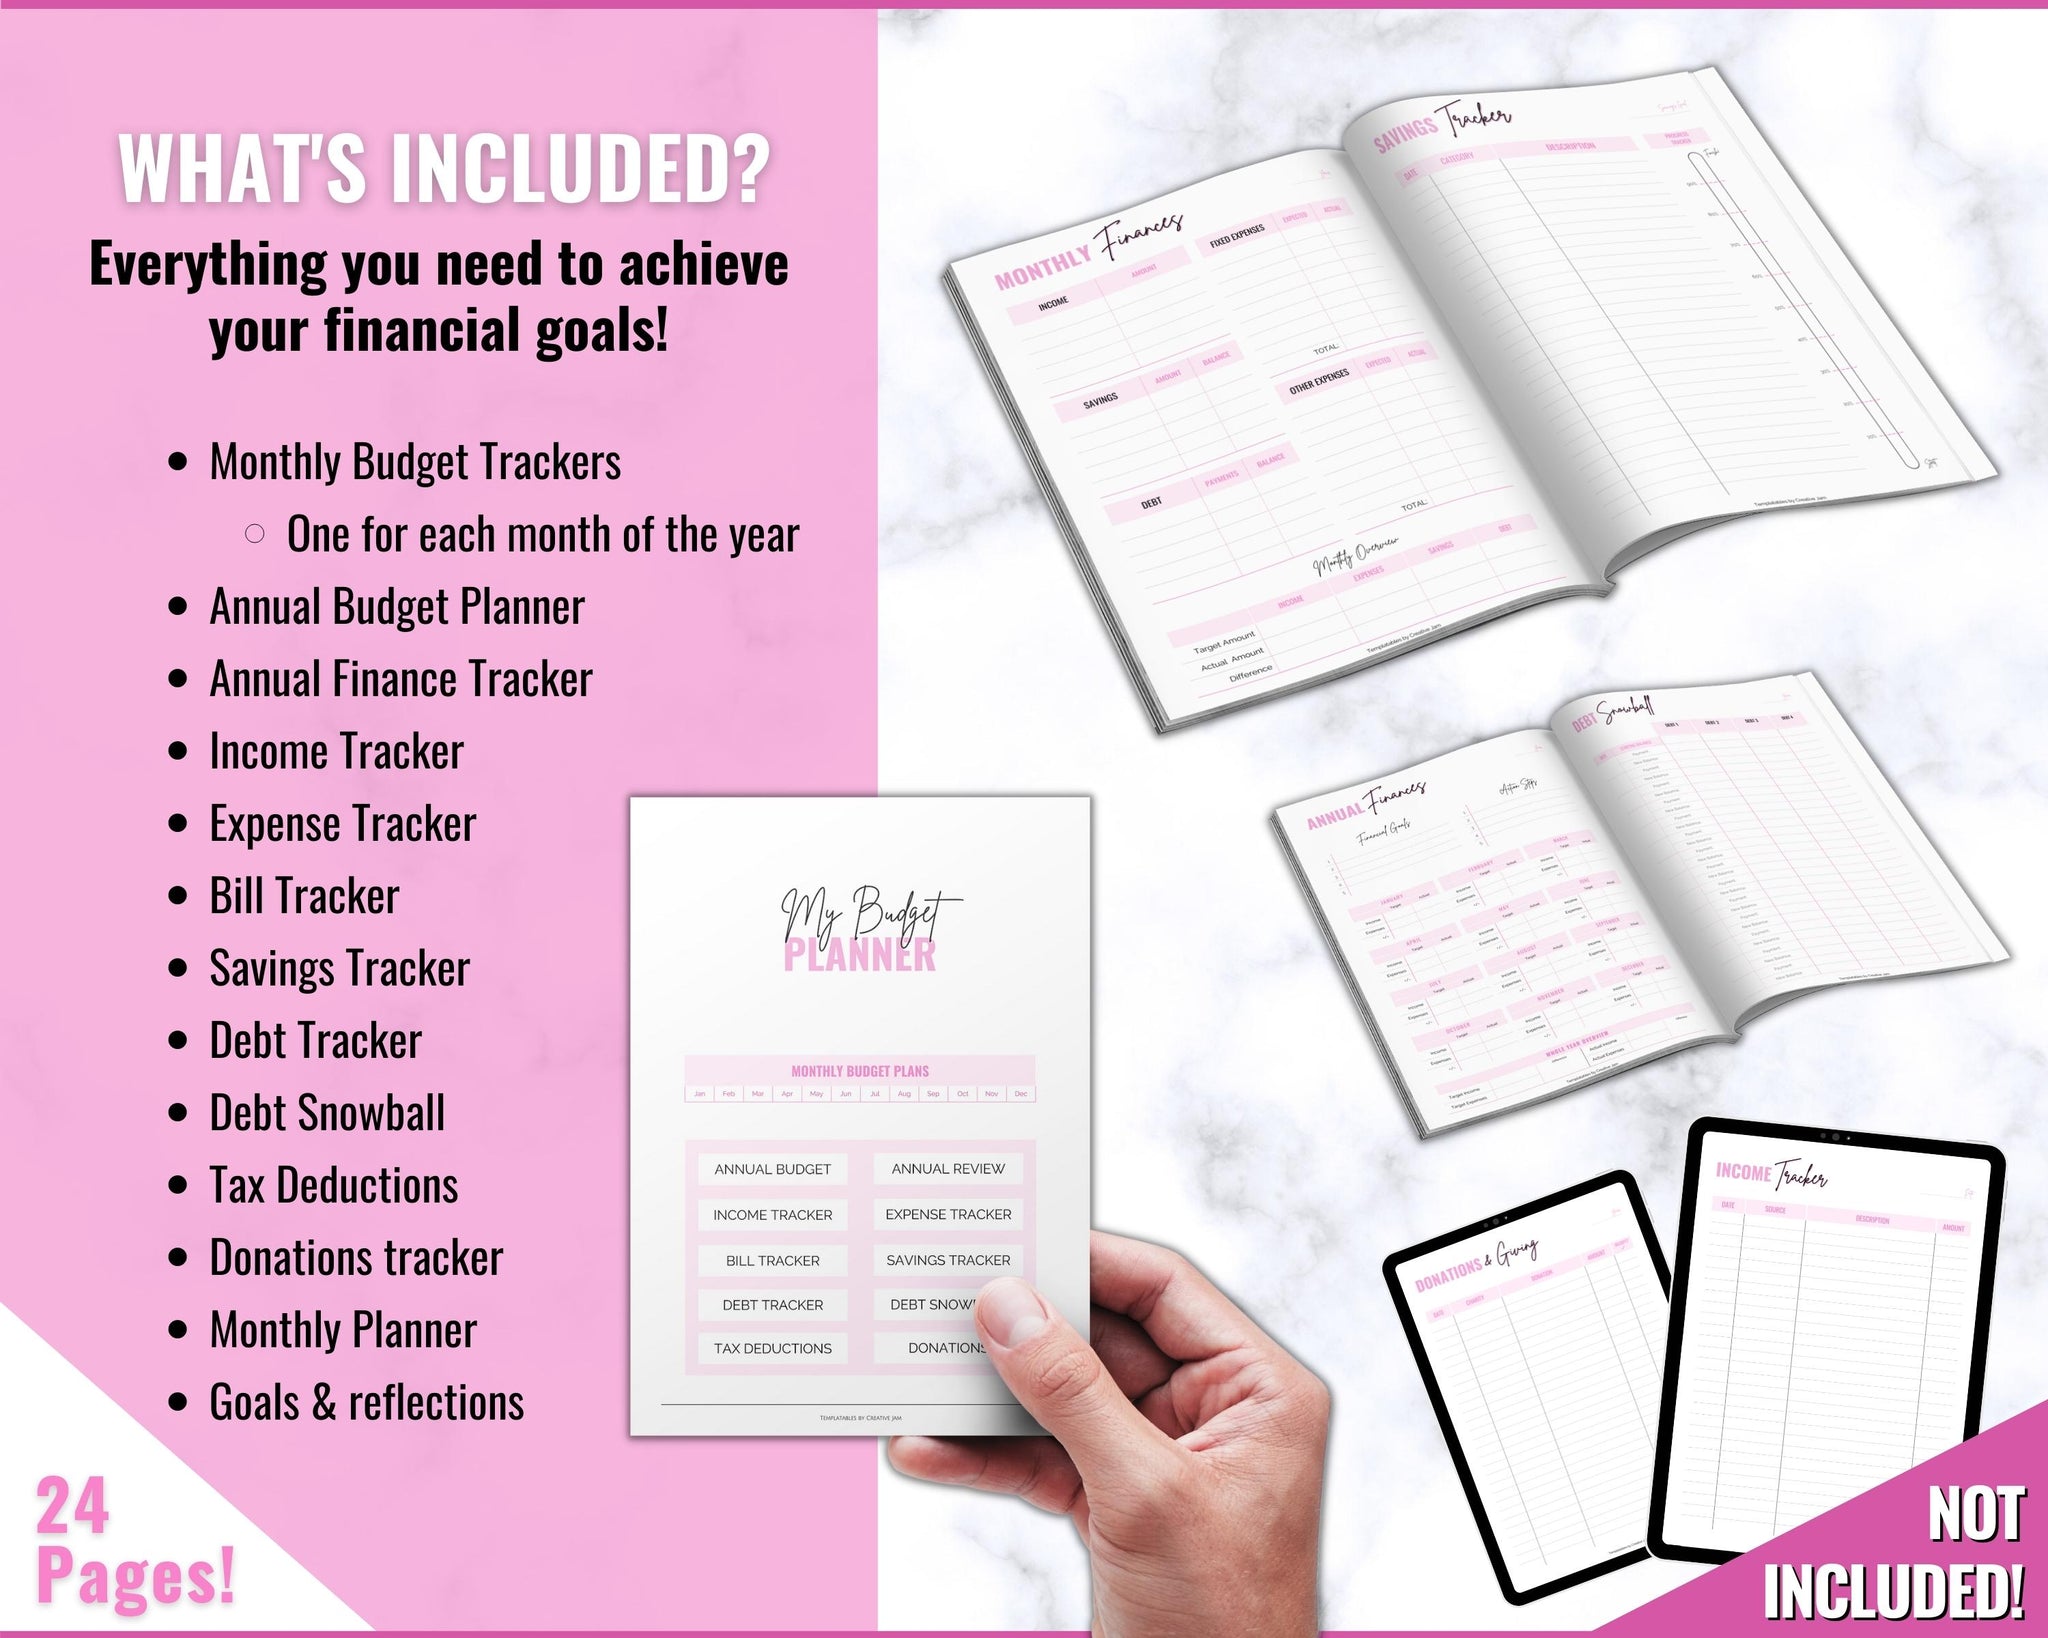 Printable Monthly Budget Planner Budget Template Finance Planner Budget  Plan Financial Journal Monthly Budget Sheet A4 and Letter 